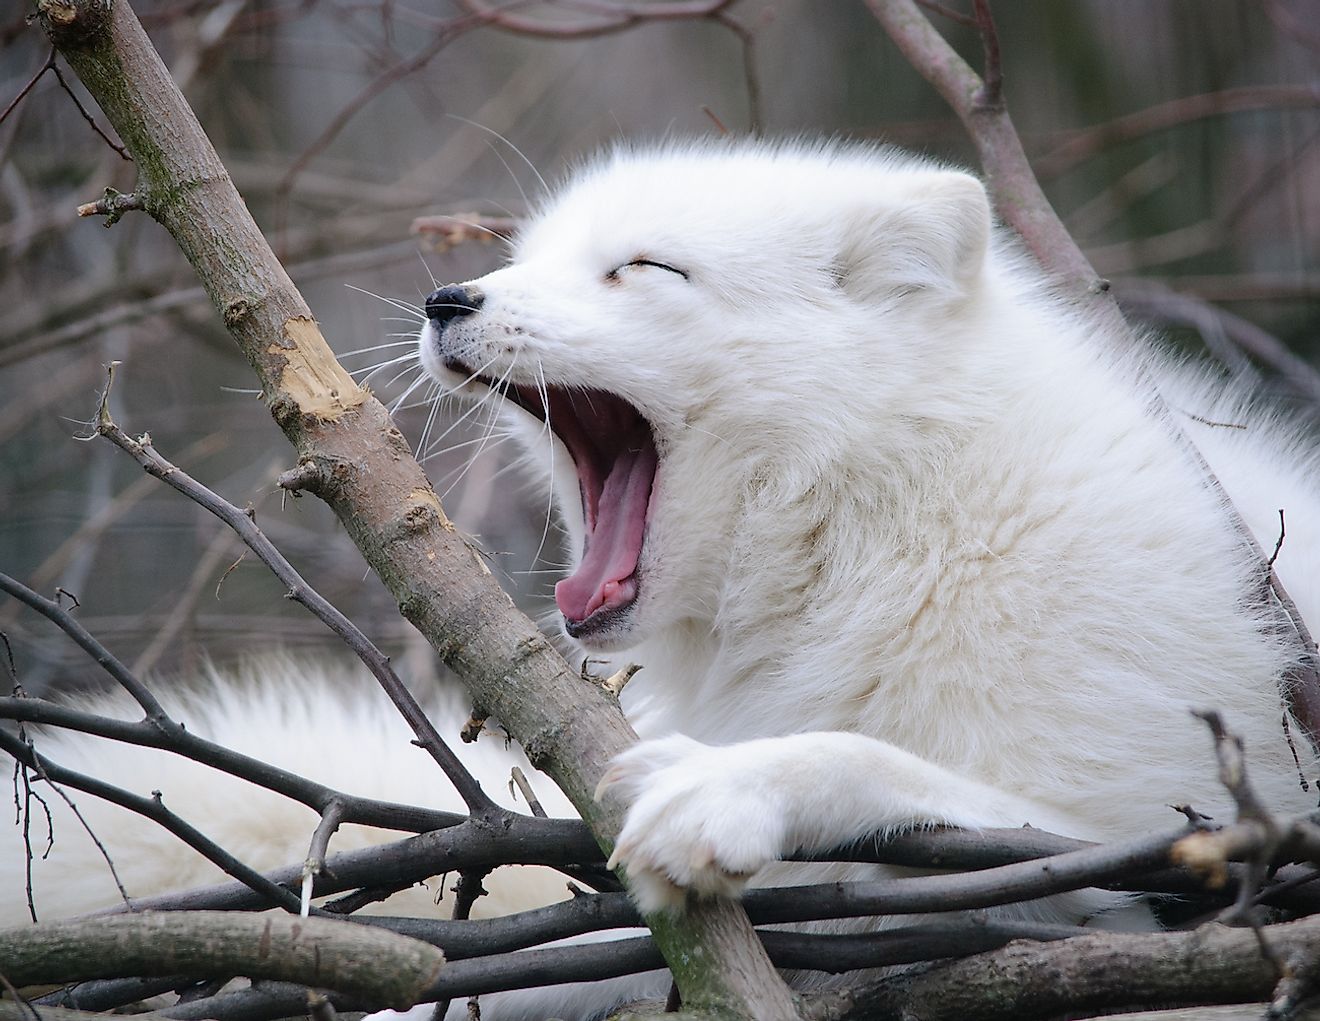 Don't go by its cute yawning face. The Arctic fox is a very skilled hunted. Image credit: Blanka Berankova/Shutterstock.com